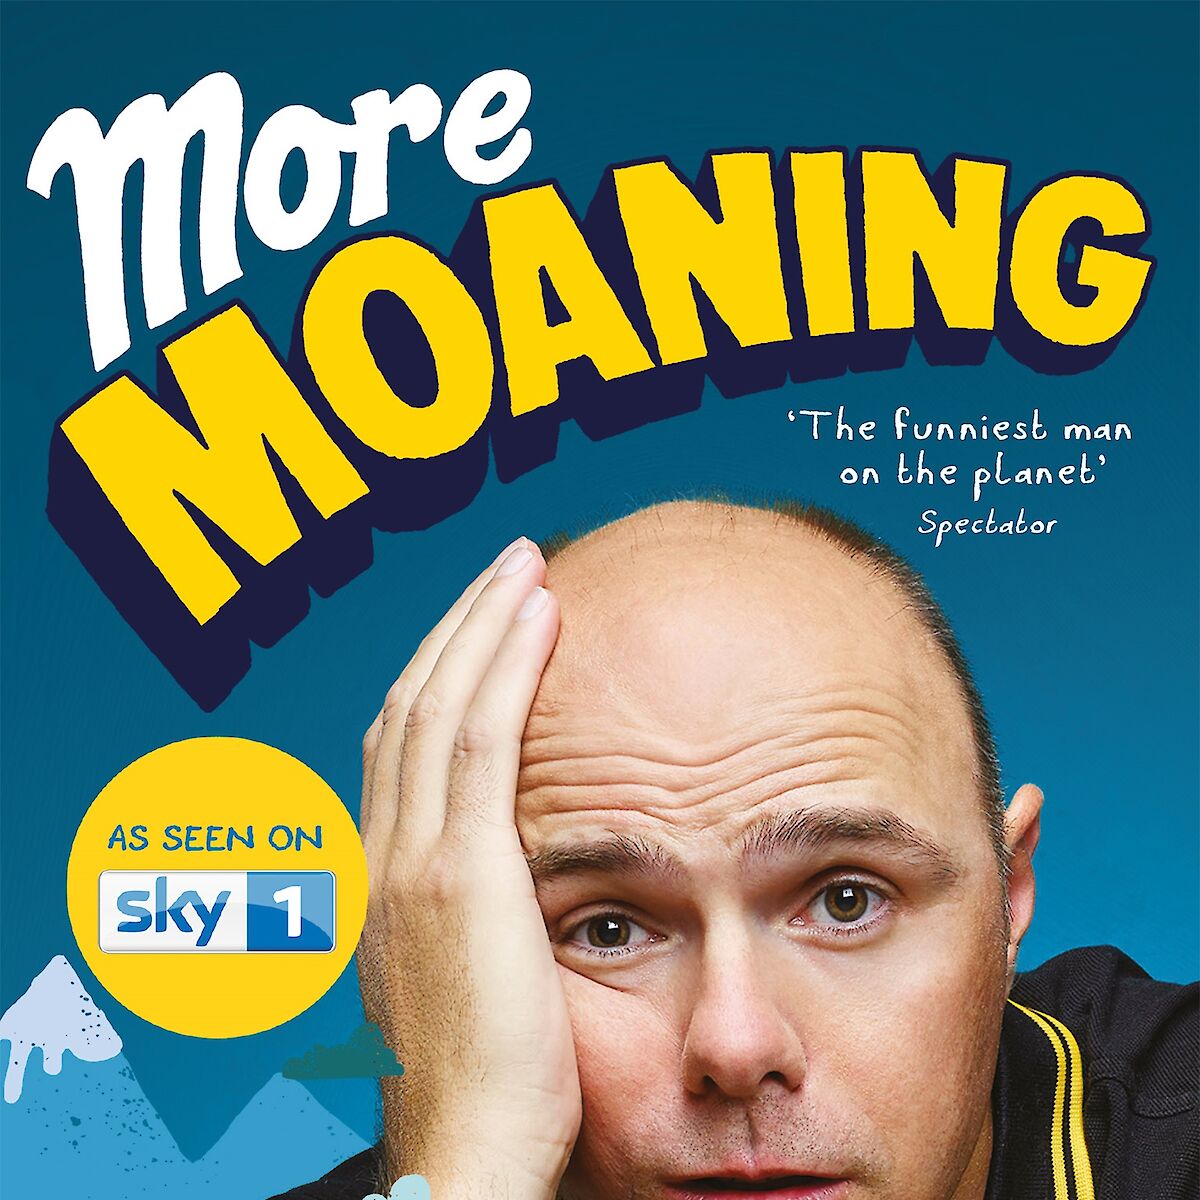 More Moaning - The Enlightened One Returns by Karl Pilkington ...